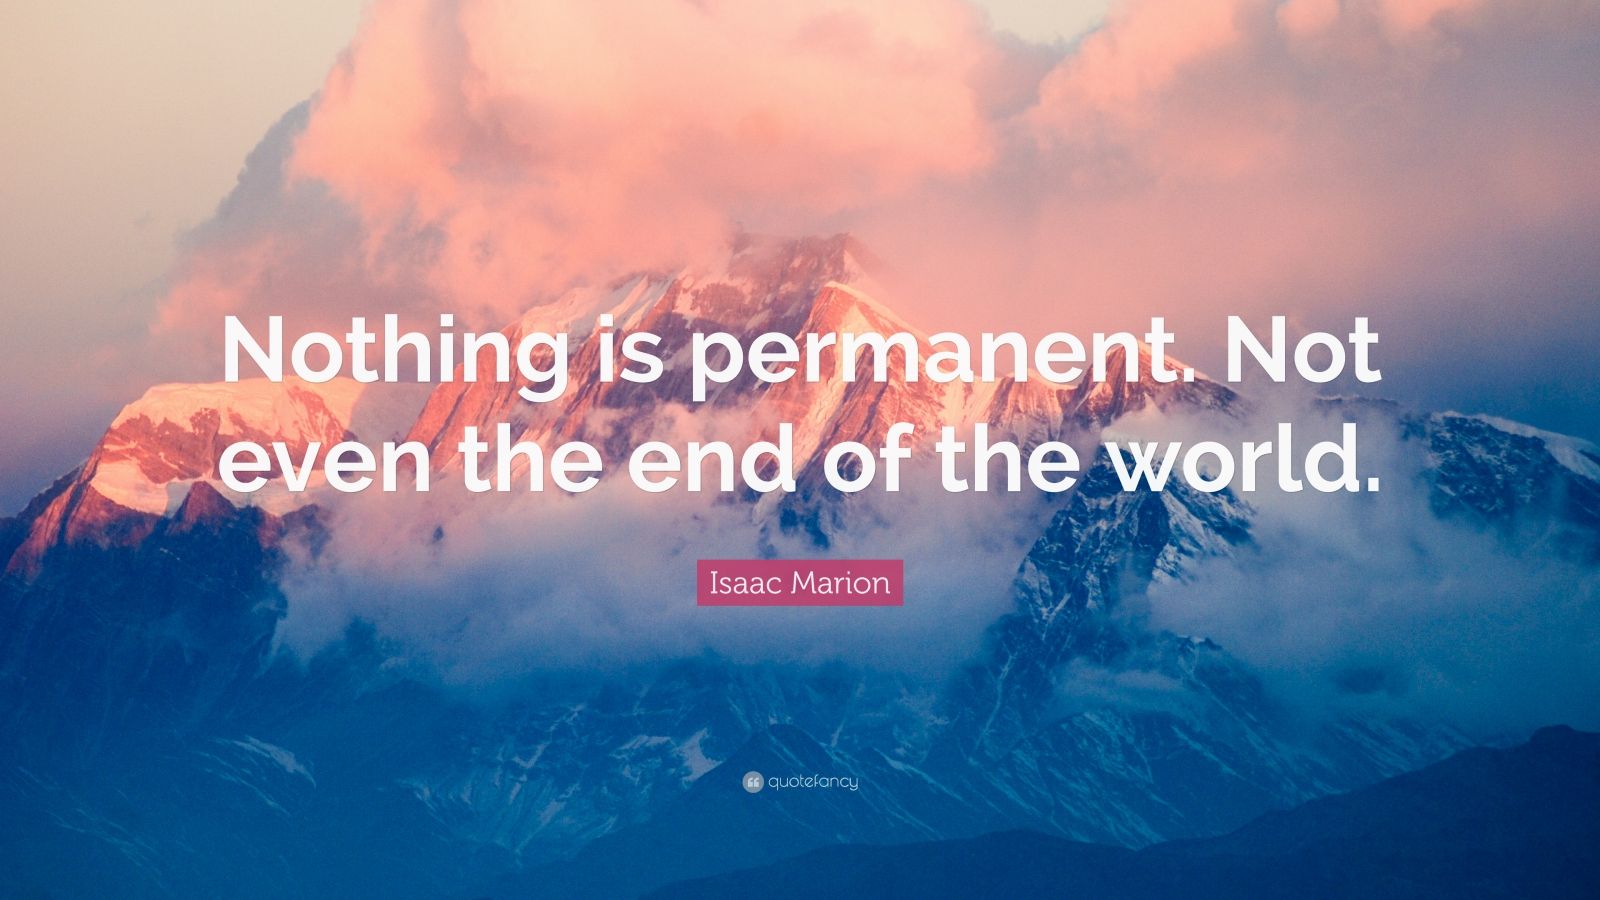 Isaac Marion Quote: “Nothing is permanent. Not even the end of the ...